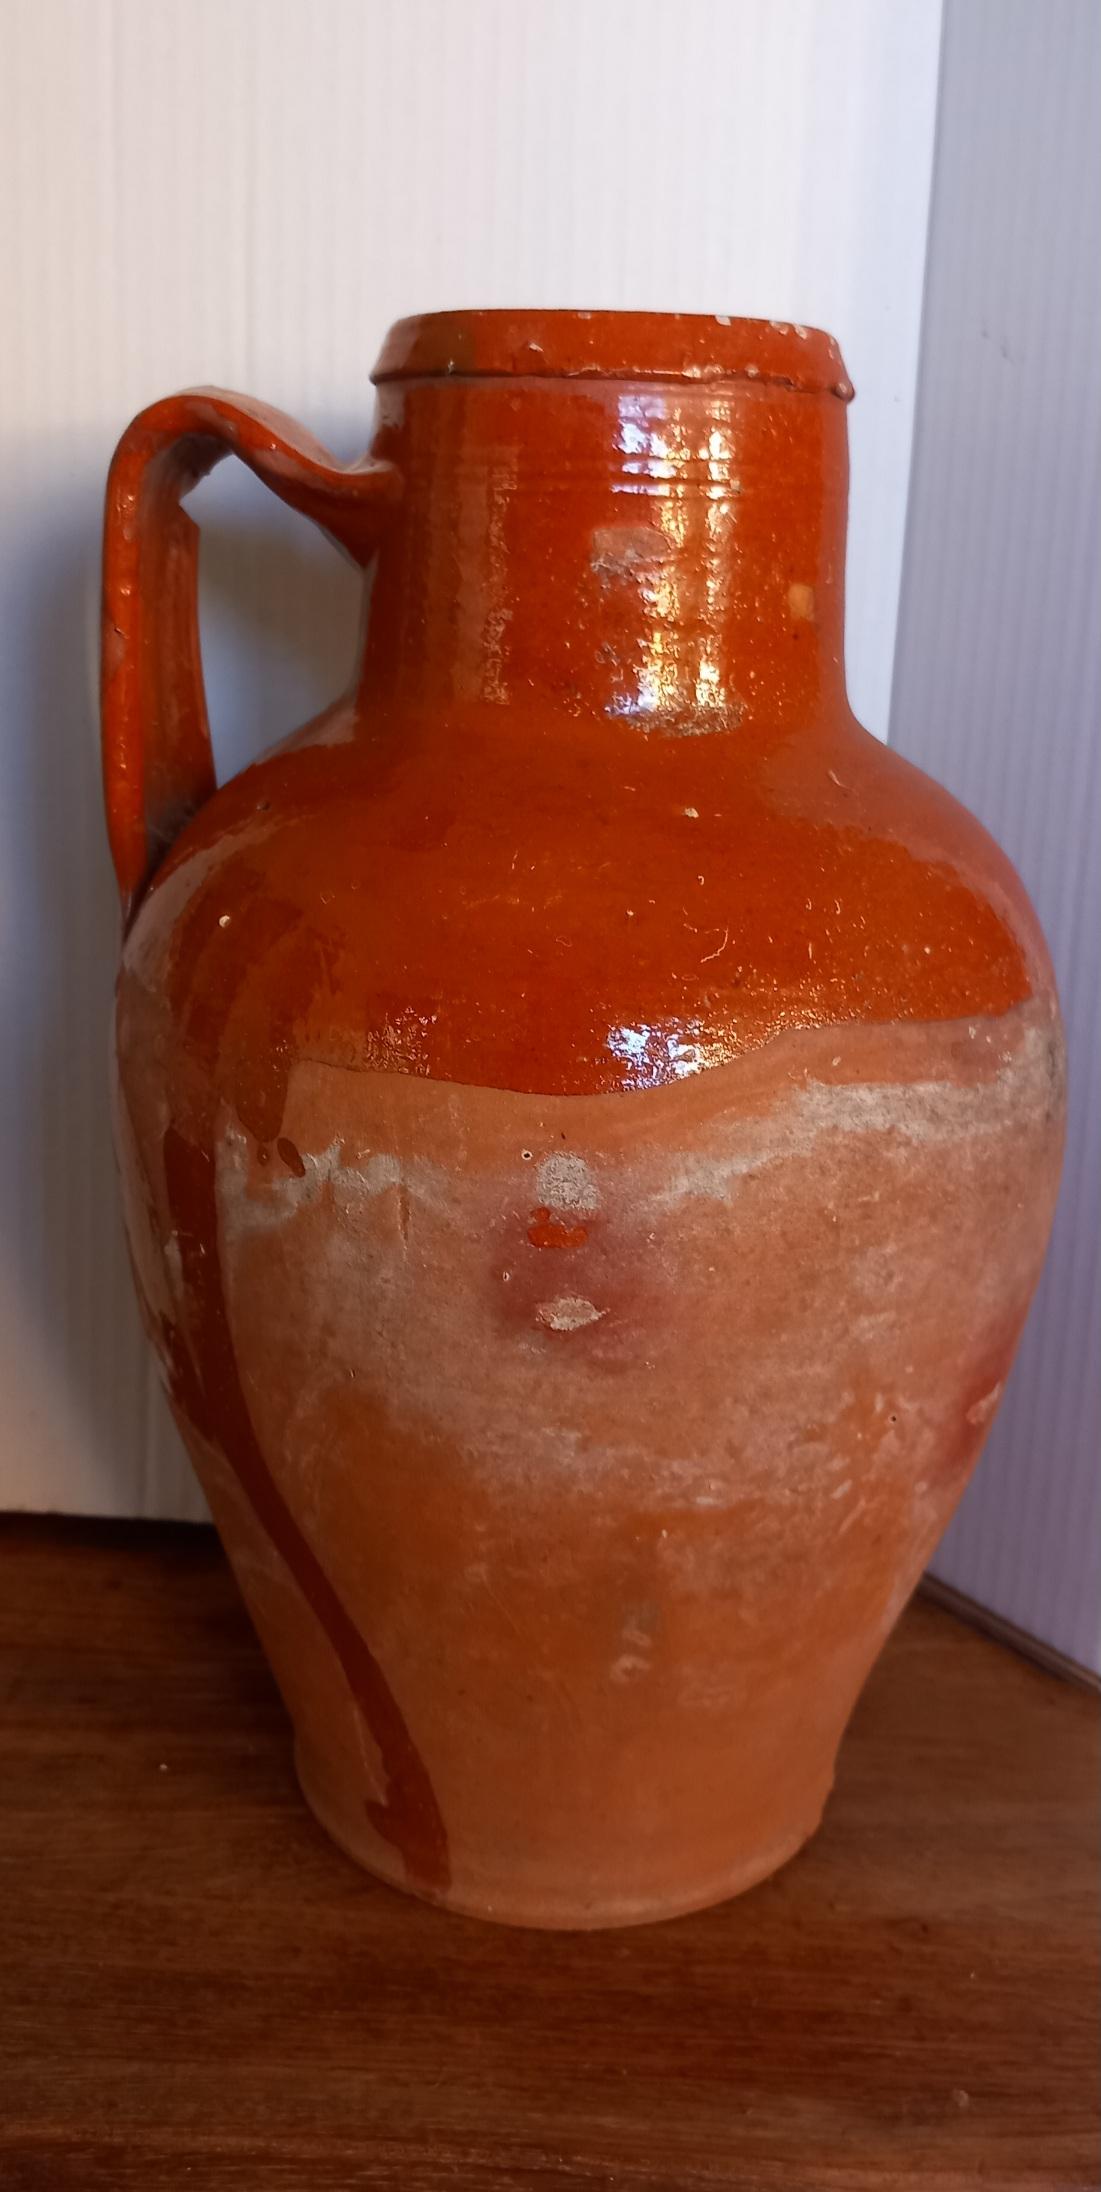 Pitcher with a Spanish ceramic handle. Early 20th century
Typical Spanish fired clay jug
It is made of fired clay, molded by hand and glazed on the inside and on the top, so that the liquids do not leak.
This jug or canataro or container was used as